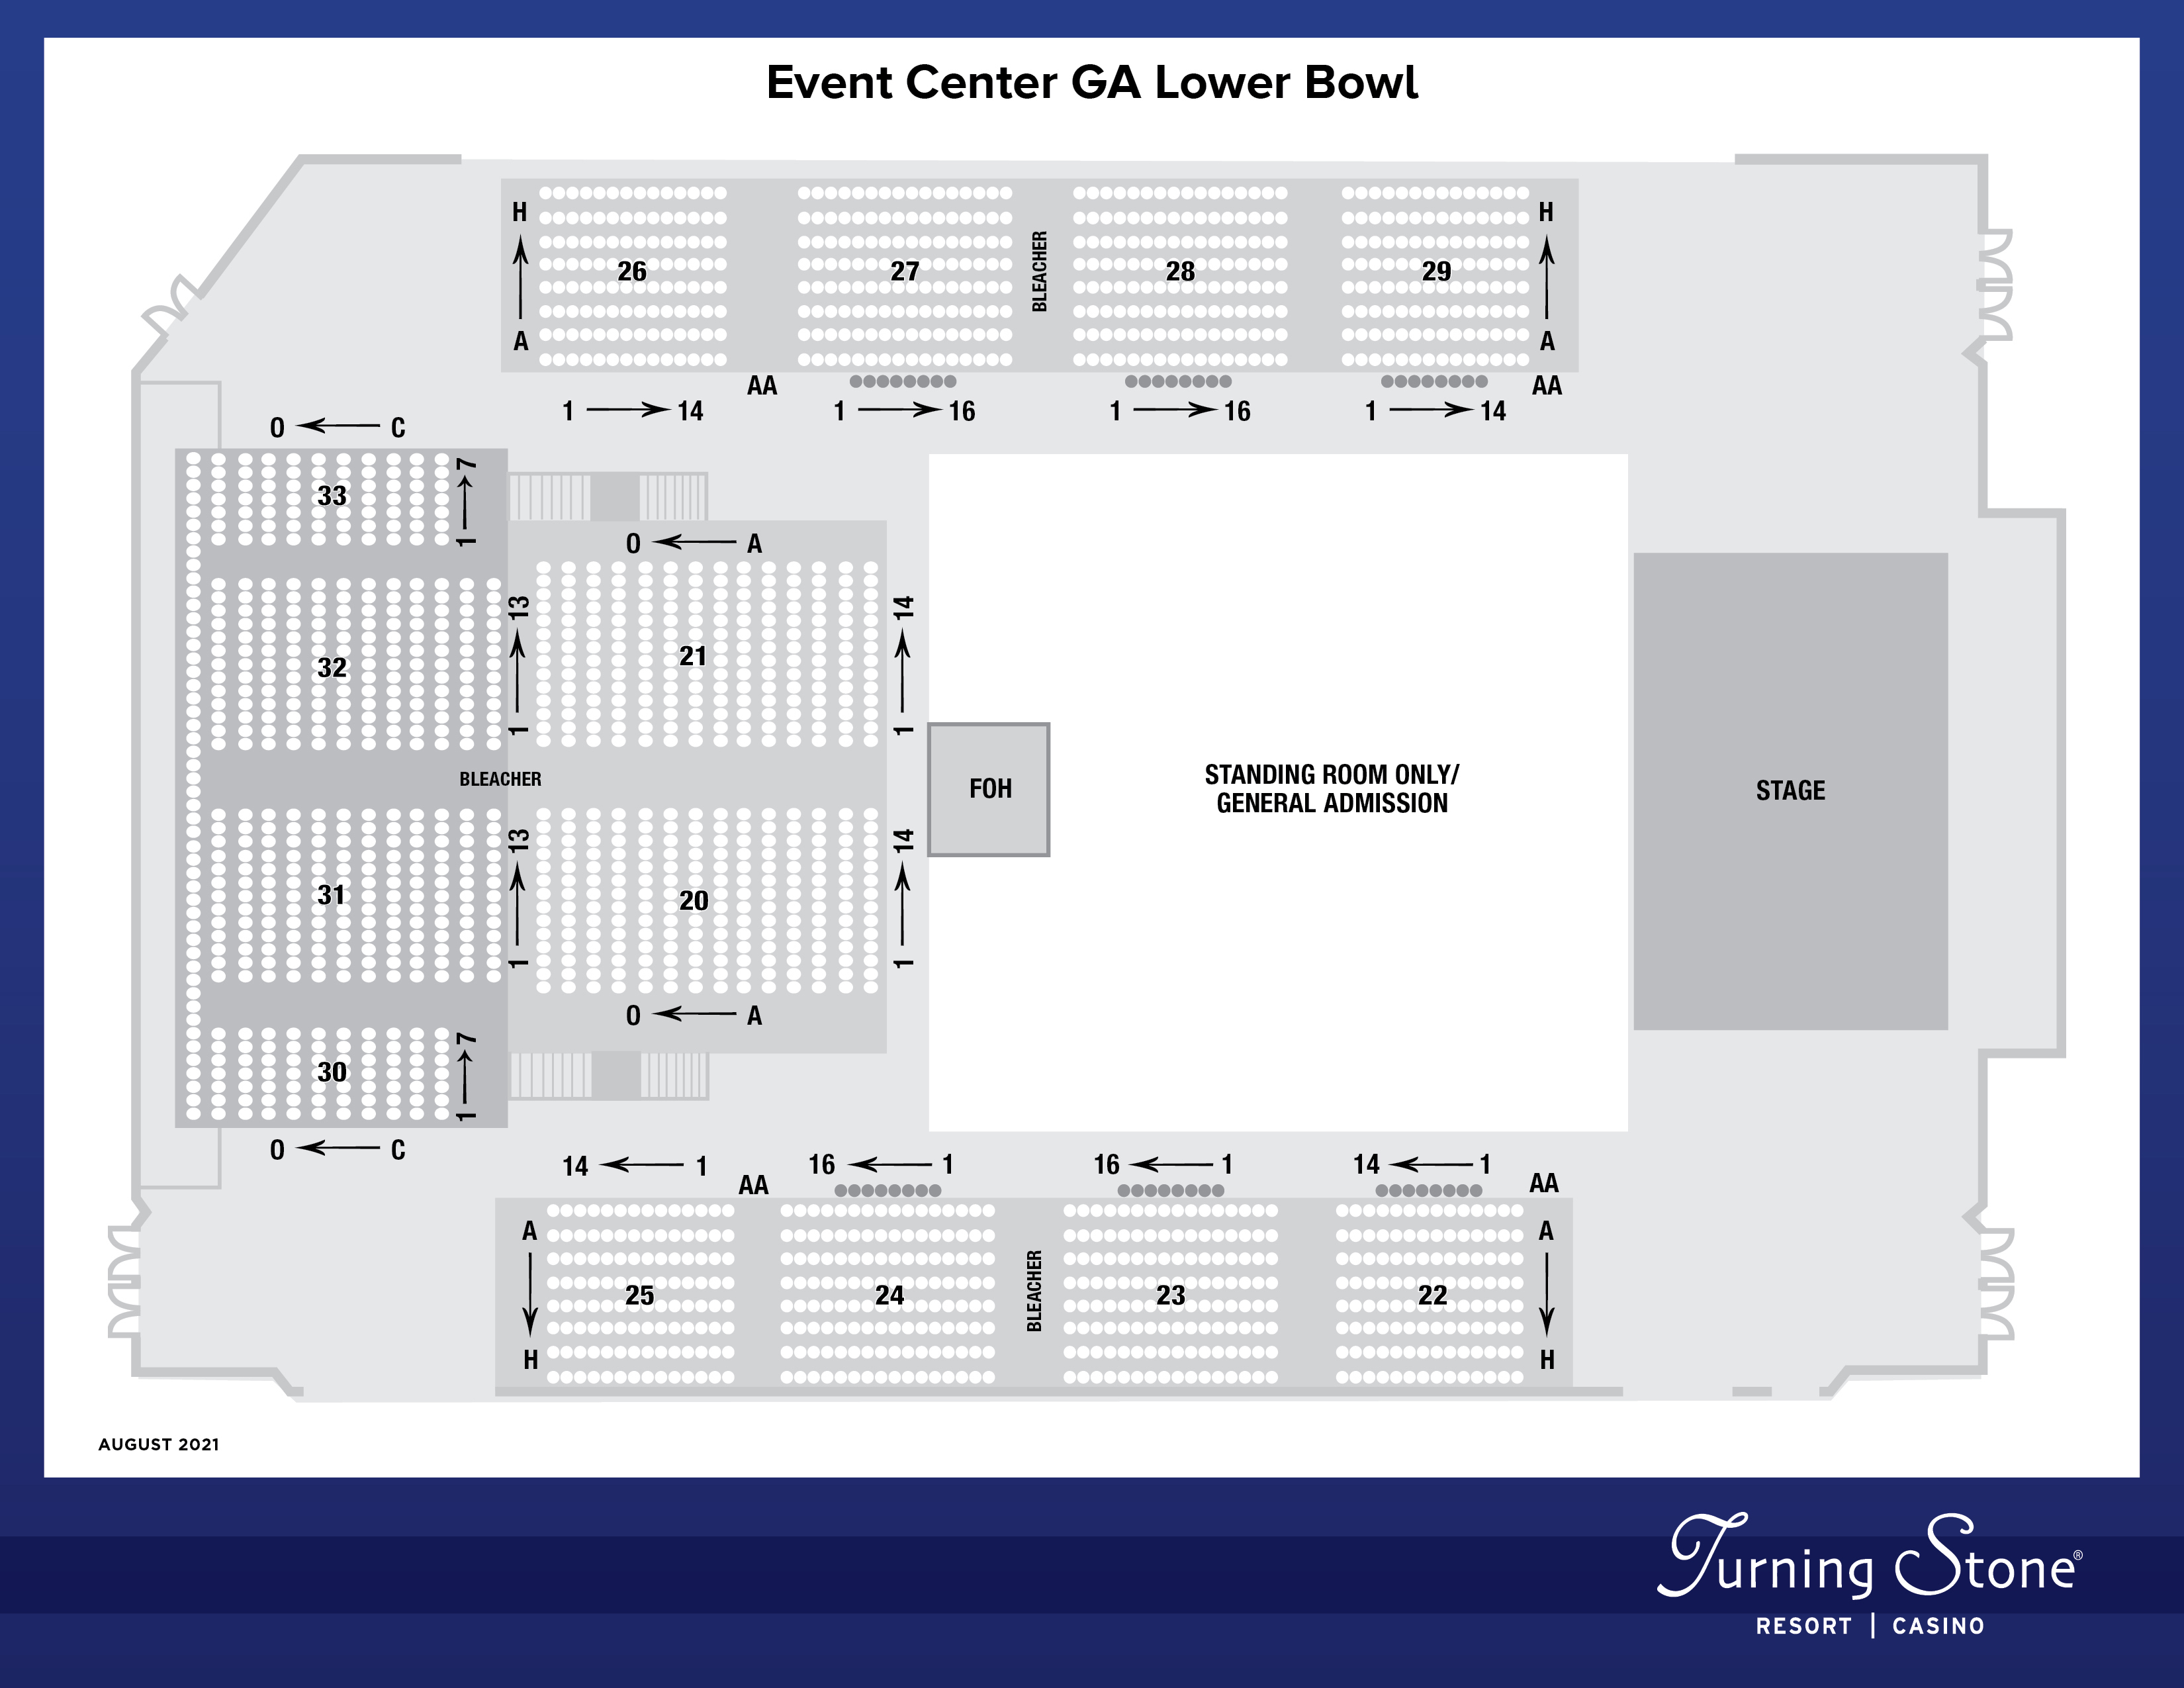 Turning Stone Event Center General Admission Lower Bowl Seating Chart